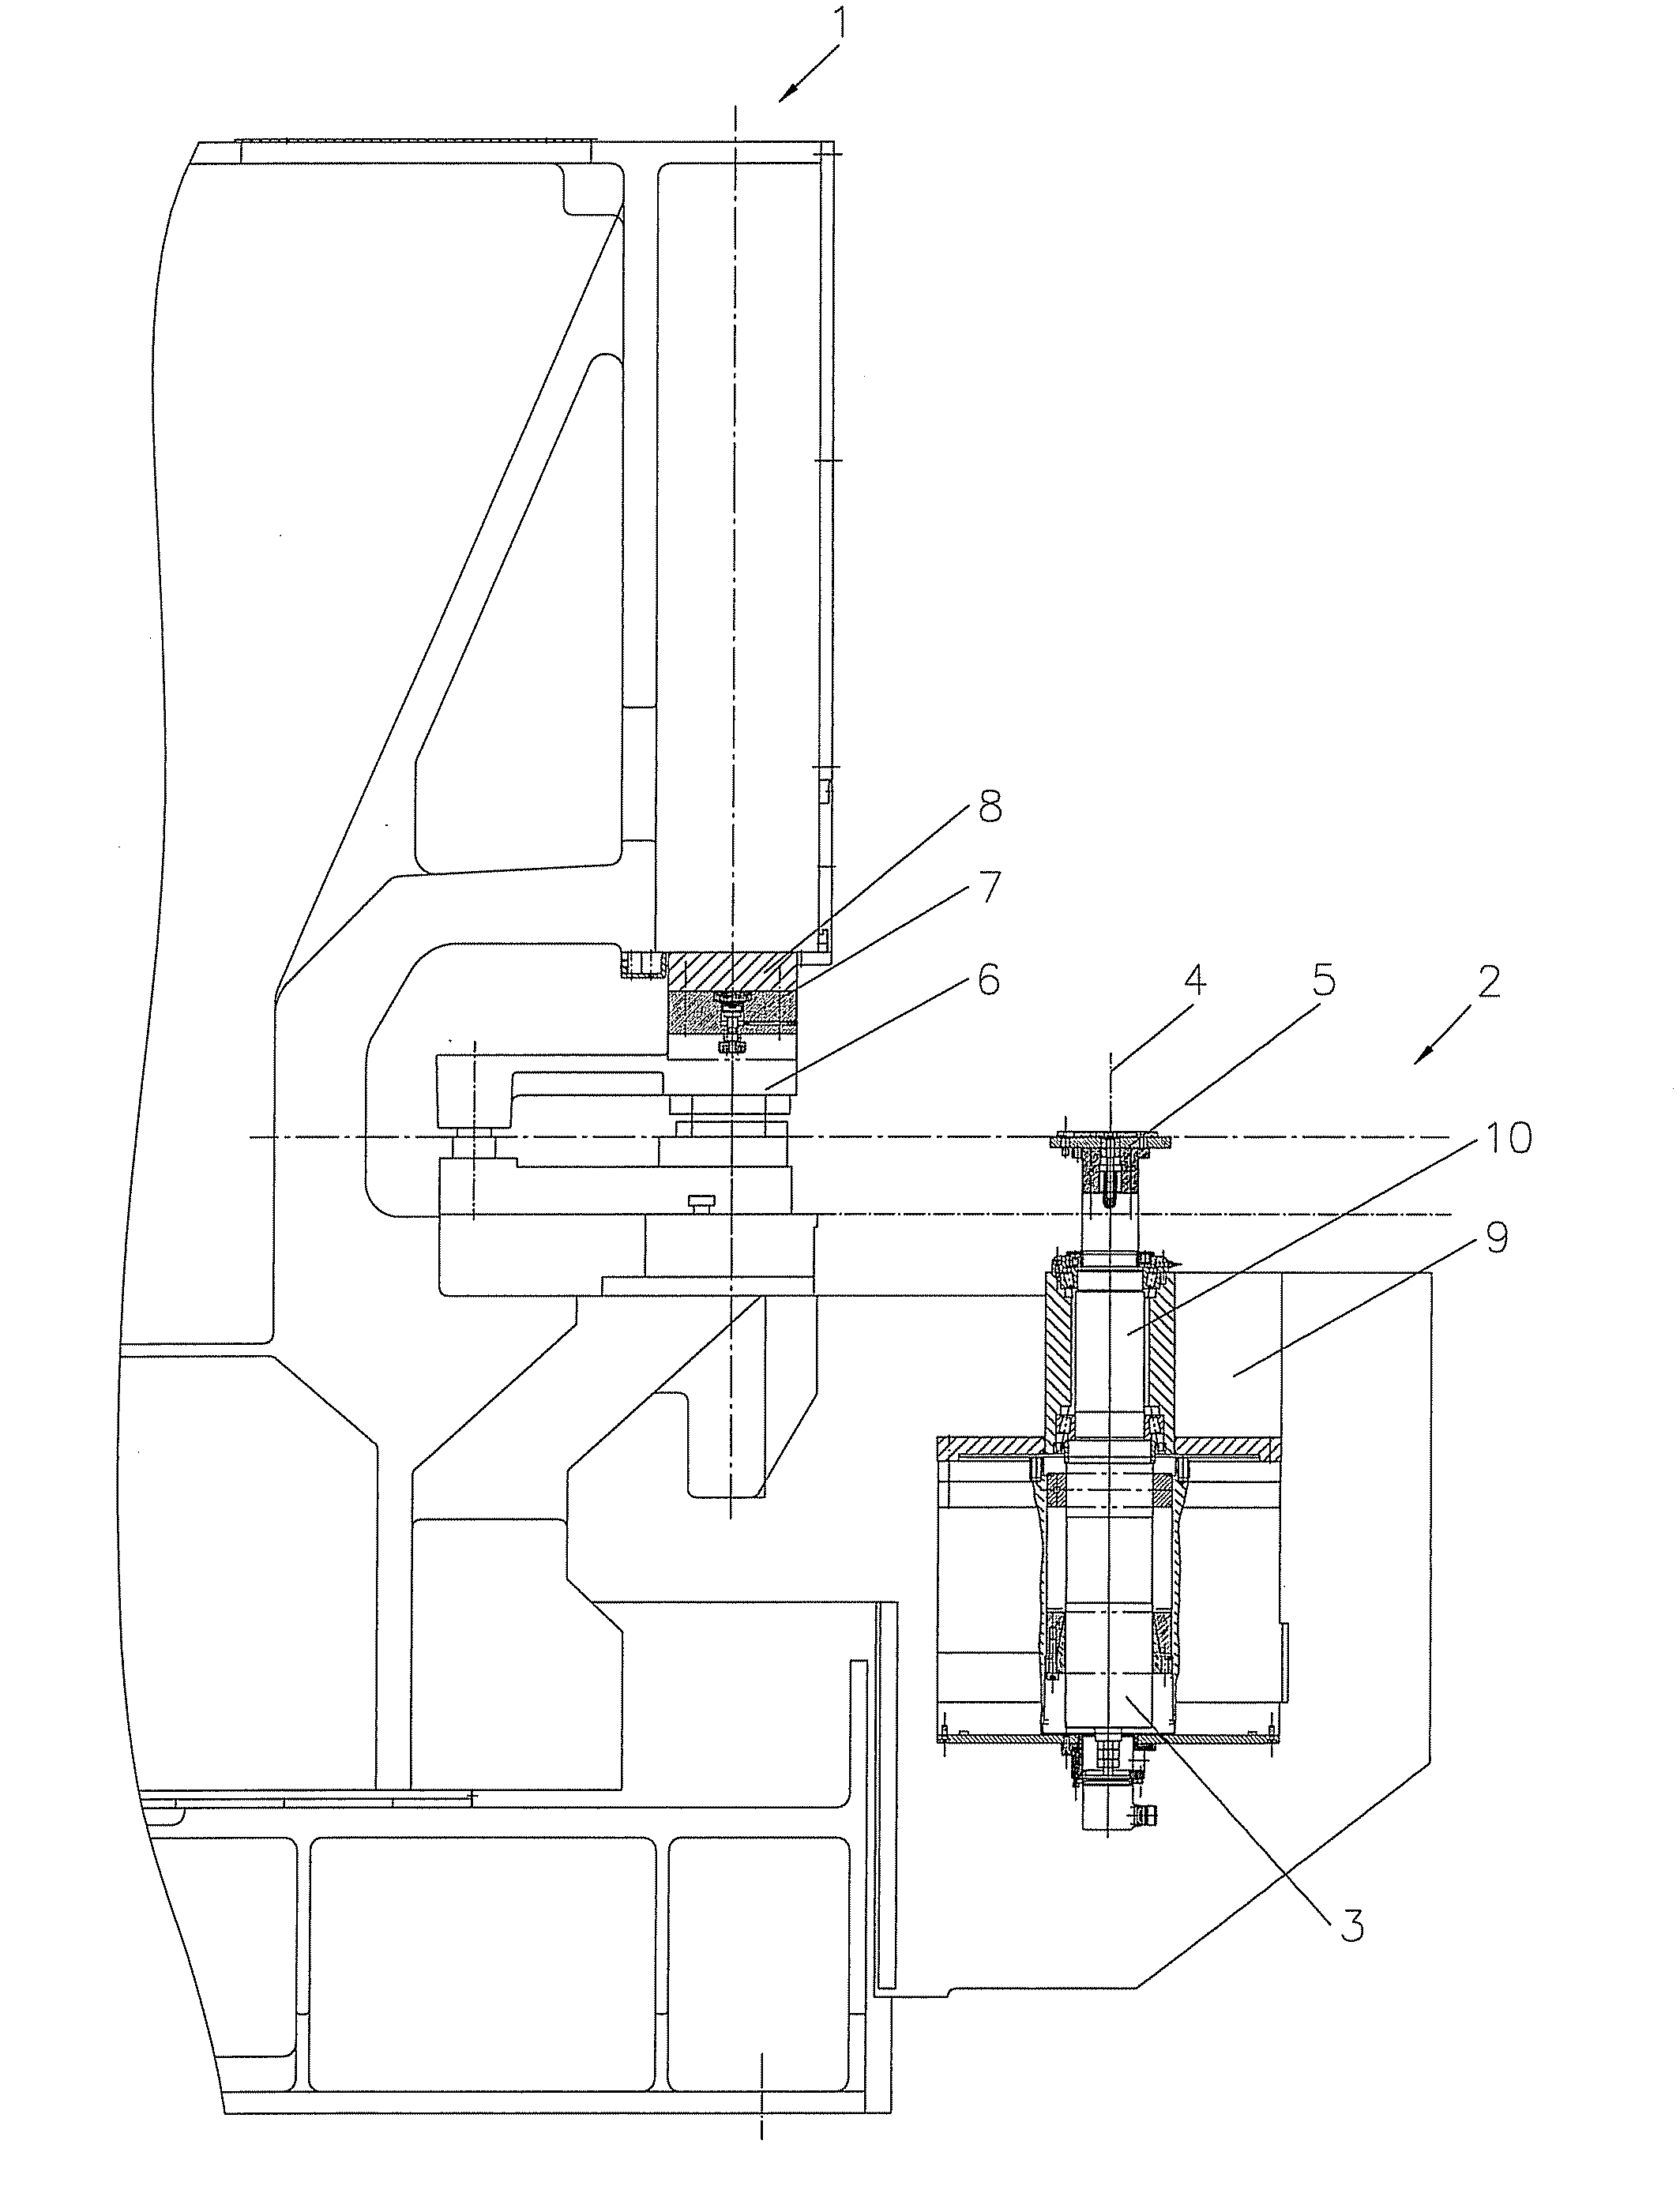 Dividing apparatus for automatic notching presses with a direct drive